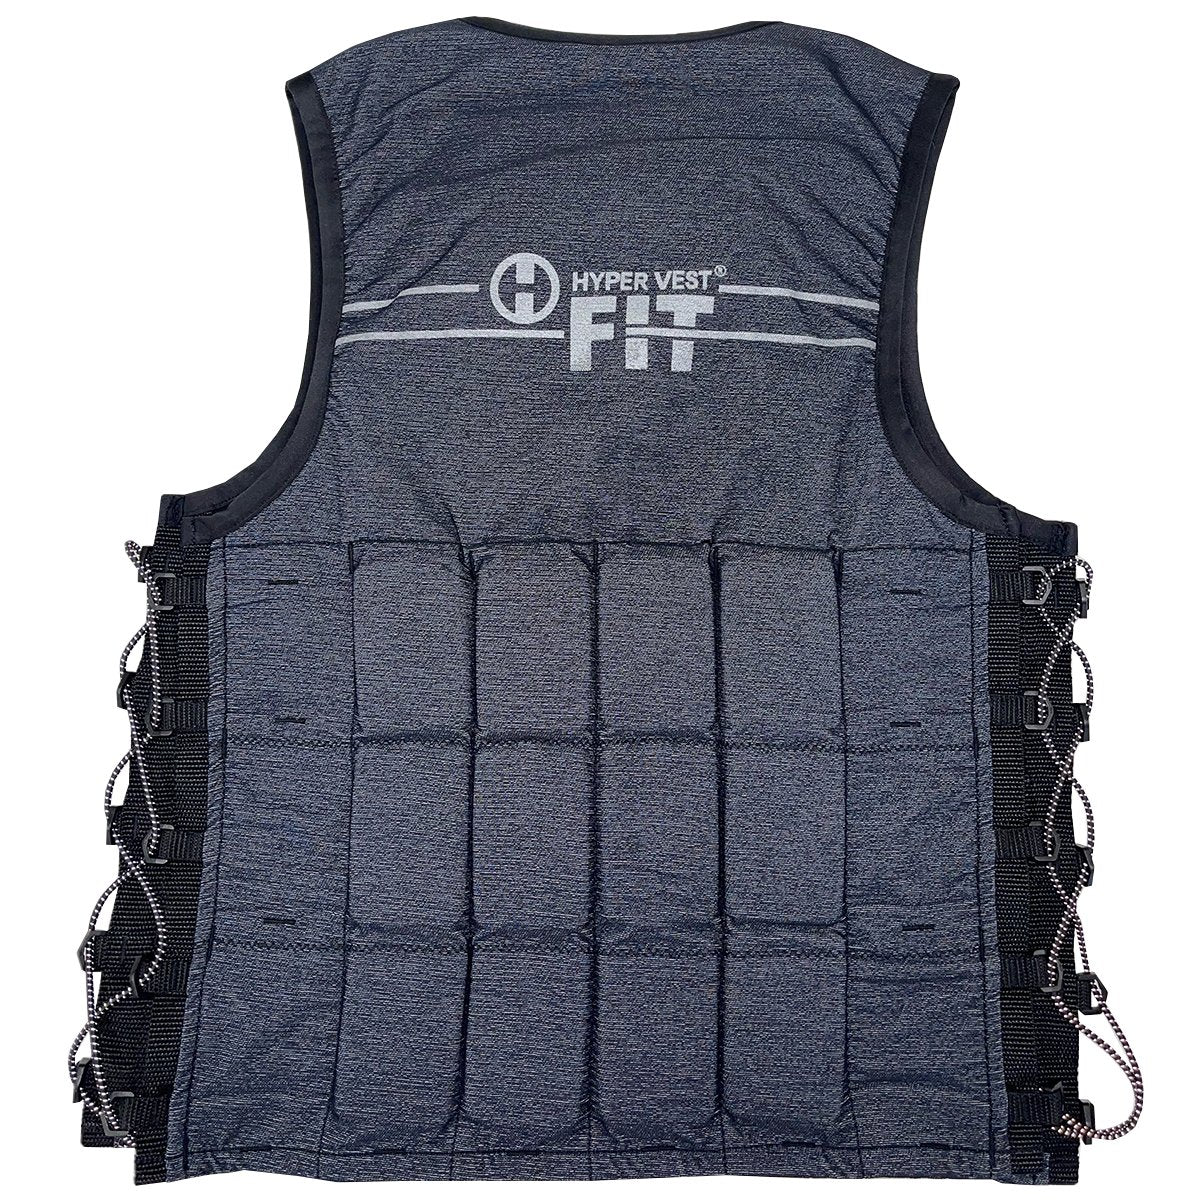 Weighted Sensory Vest - LIMITED SUPPLY